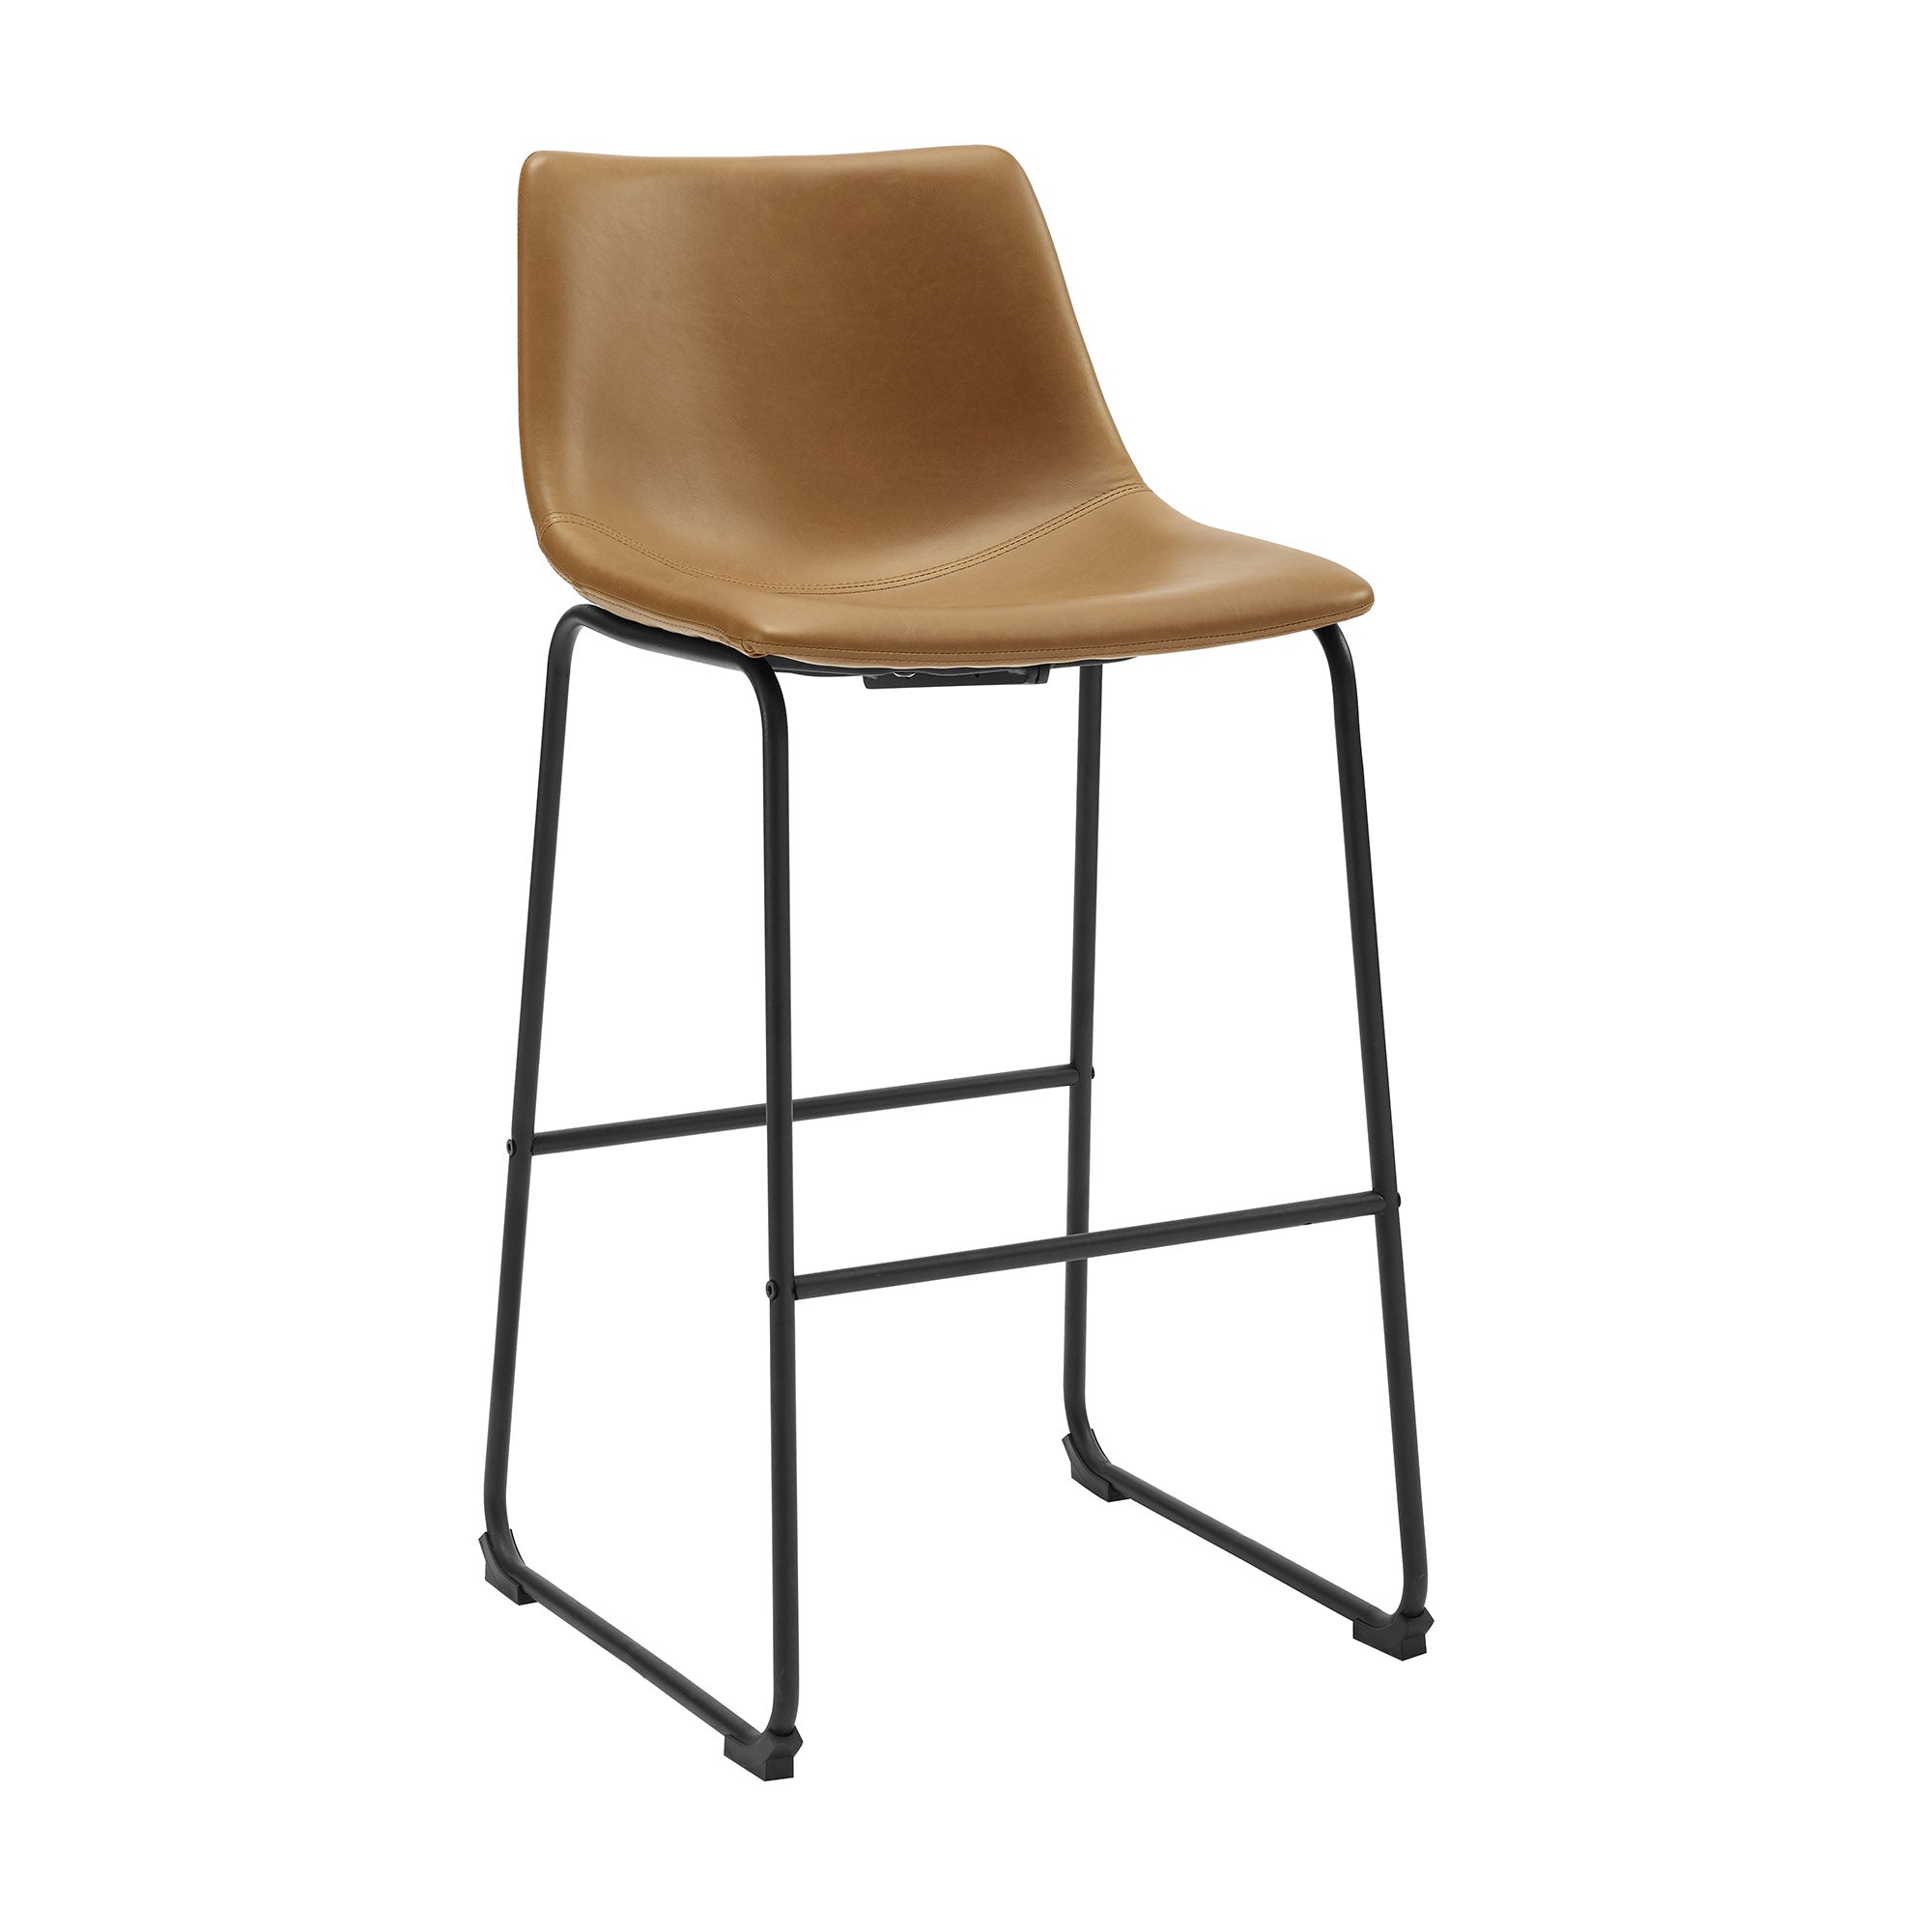 30" Industrial Faux Leather Barstools Set of 2